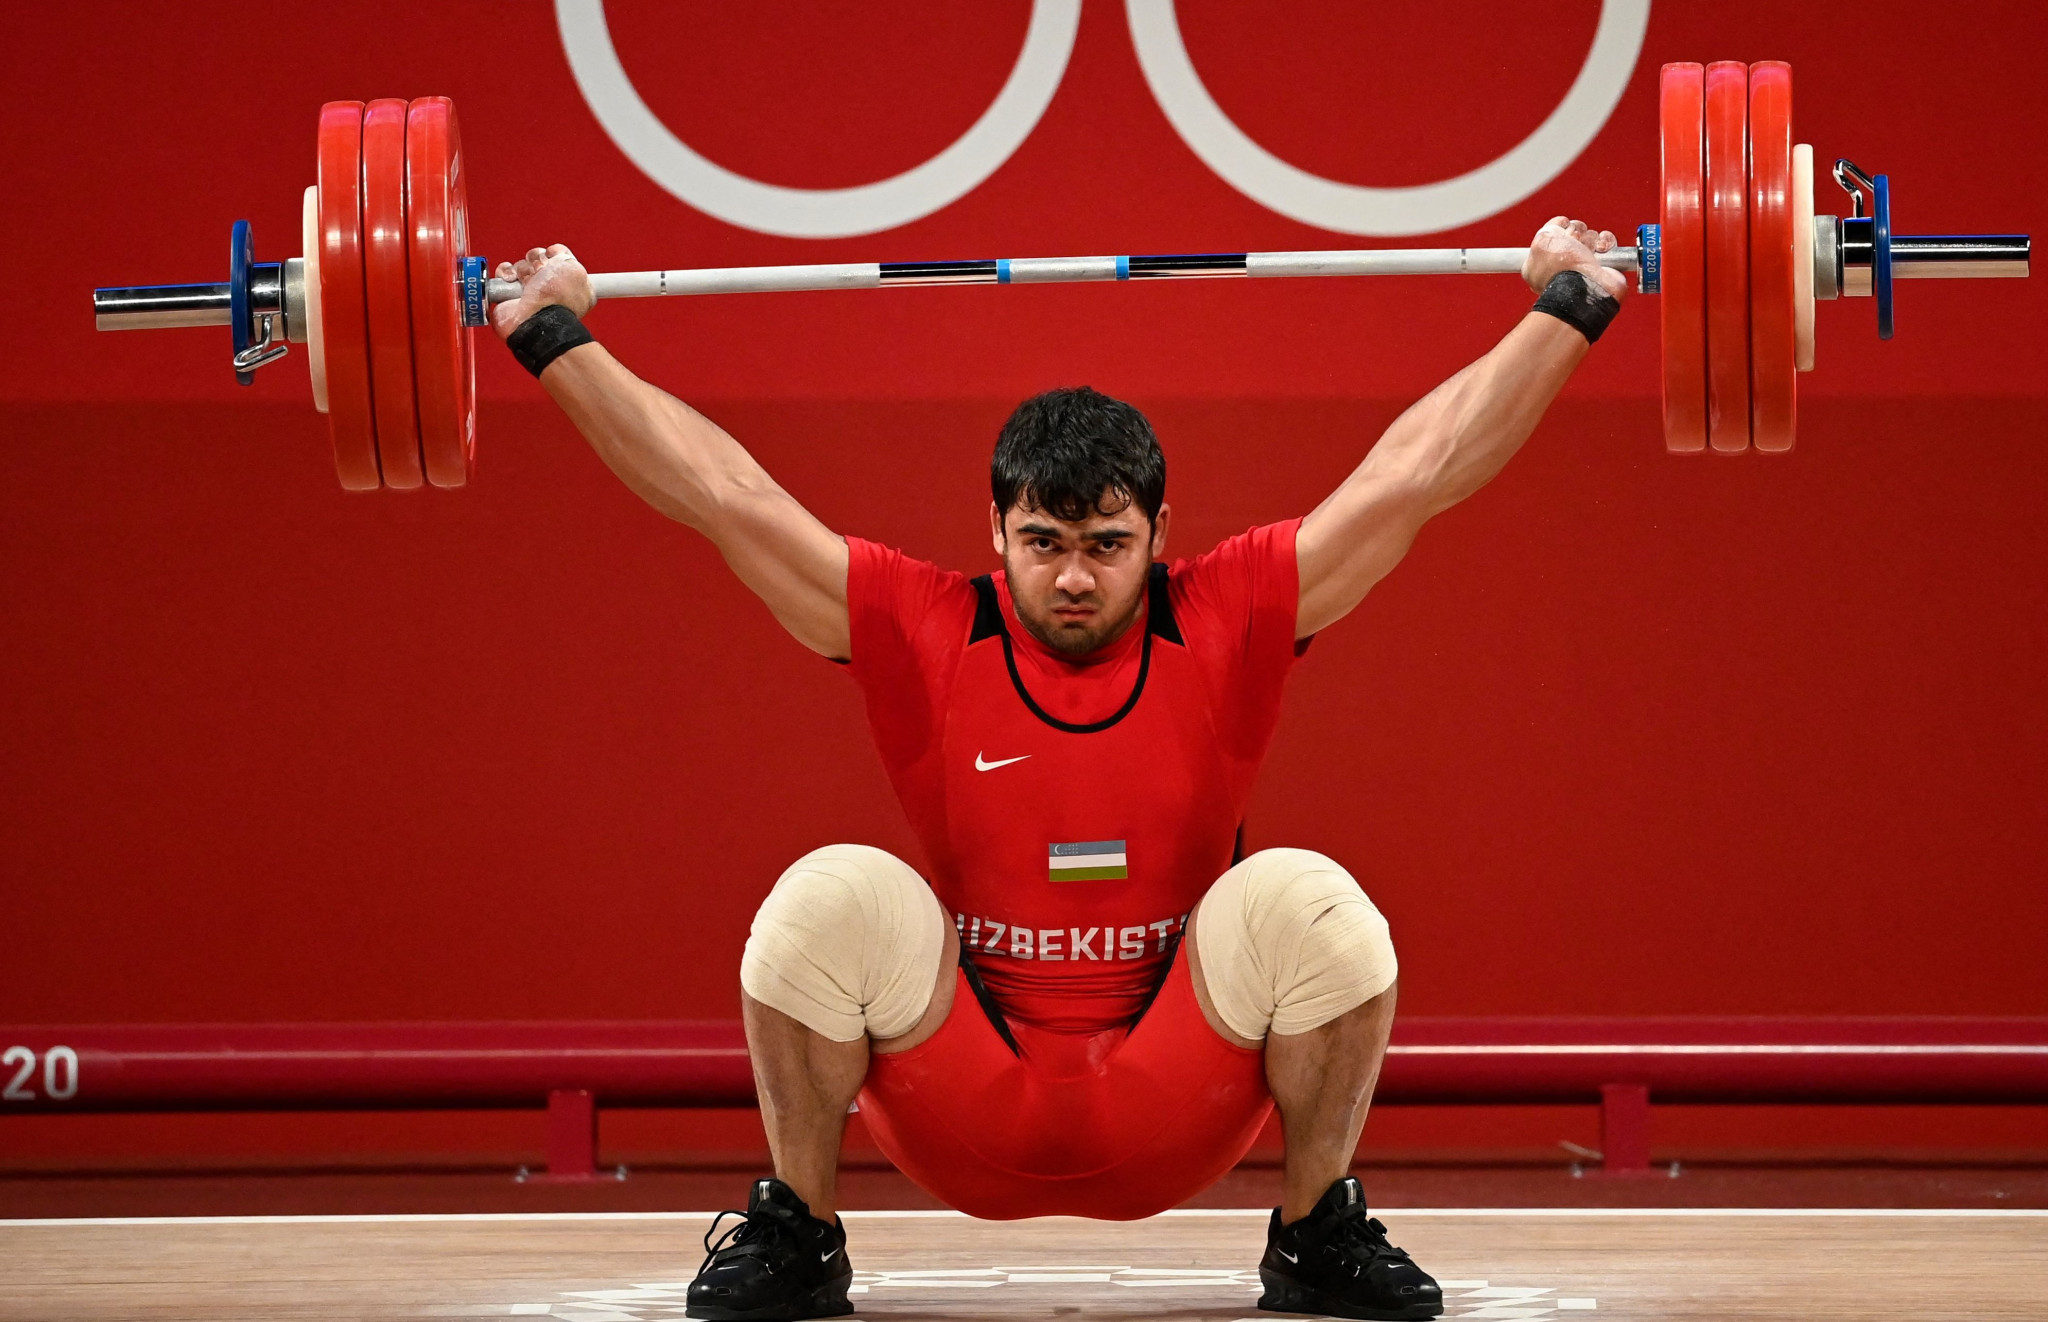 Olympic champion Akbar Djuraev will be competing on a home platform when Uzbekistan stages this year's IWF World Championships ©Getty Images